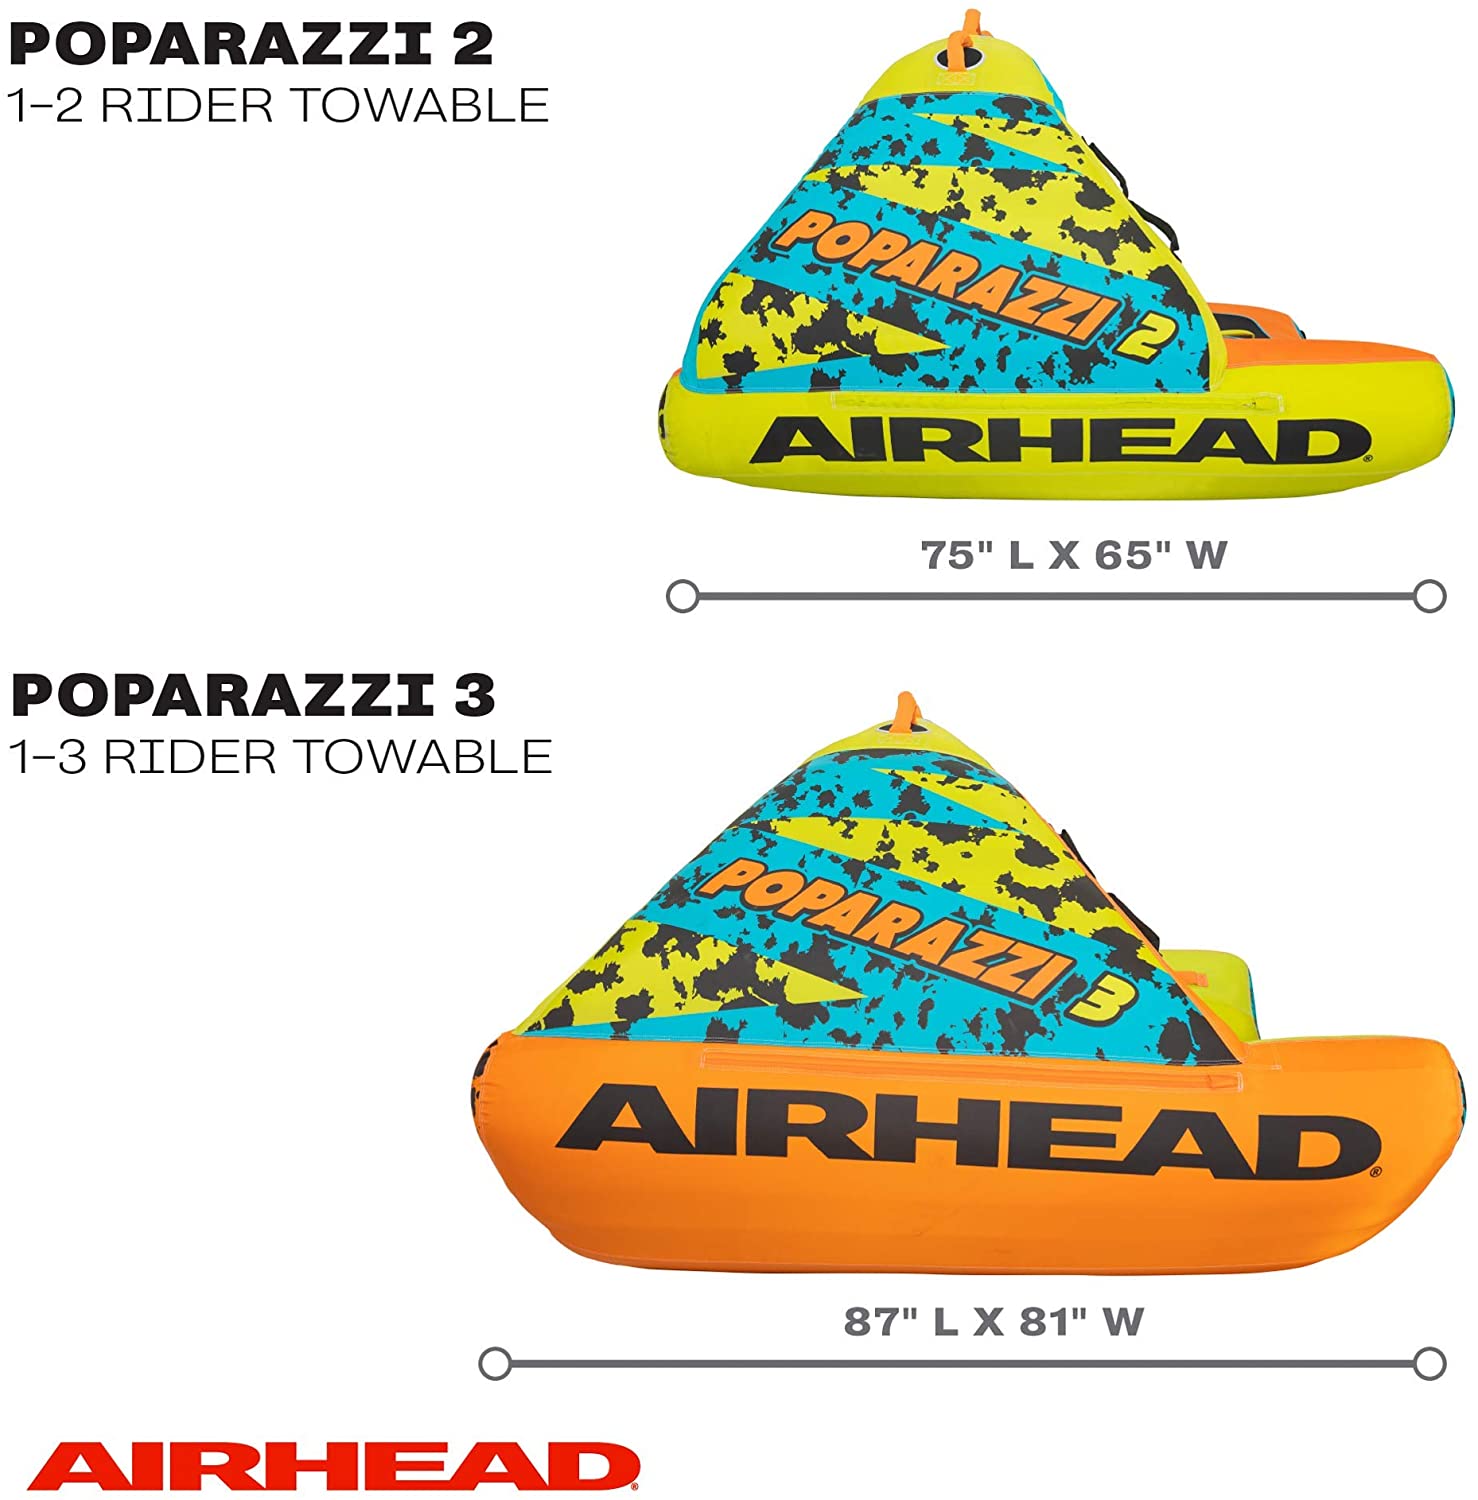 Airhead AHPZ-1750 Poparazzi 3 Person Inflatable Towable Water Lake Boating Tube - image 4 of 7